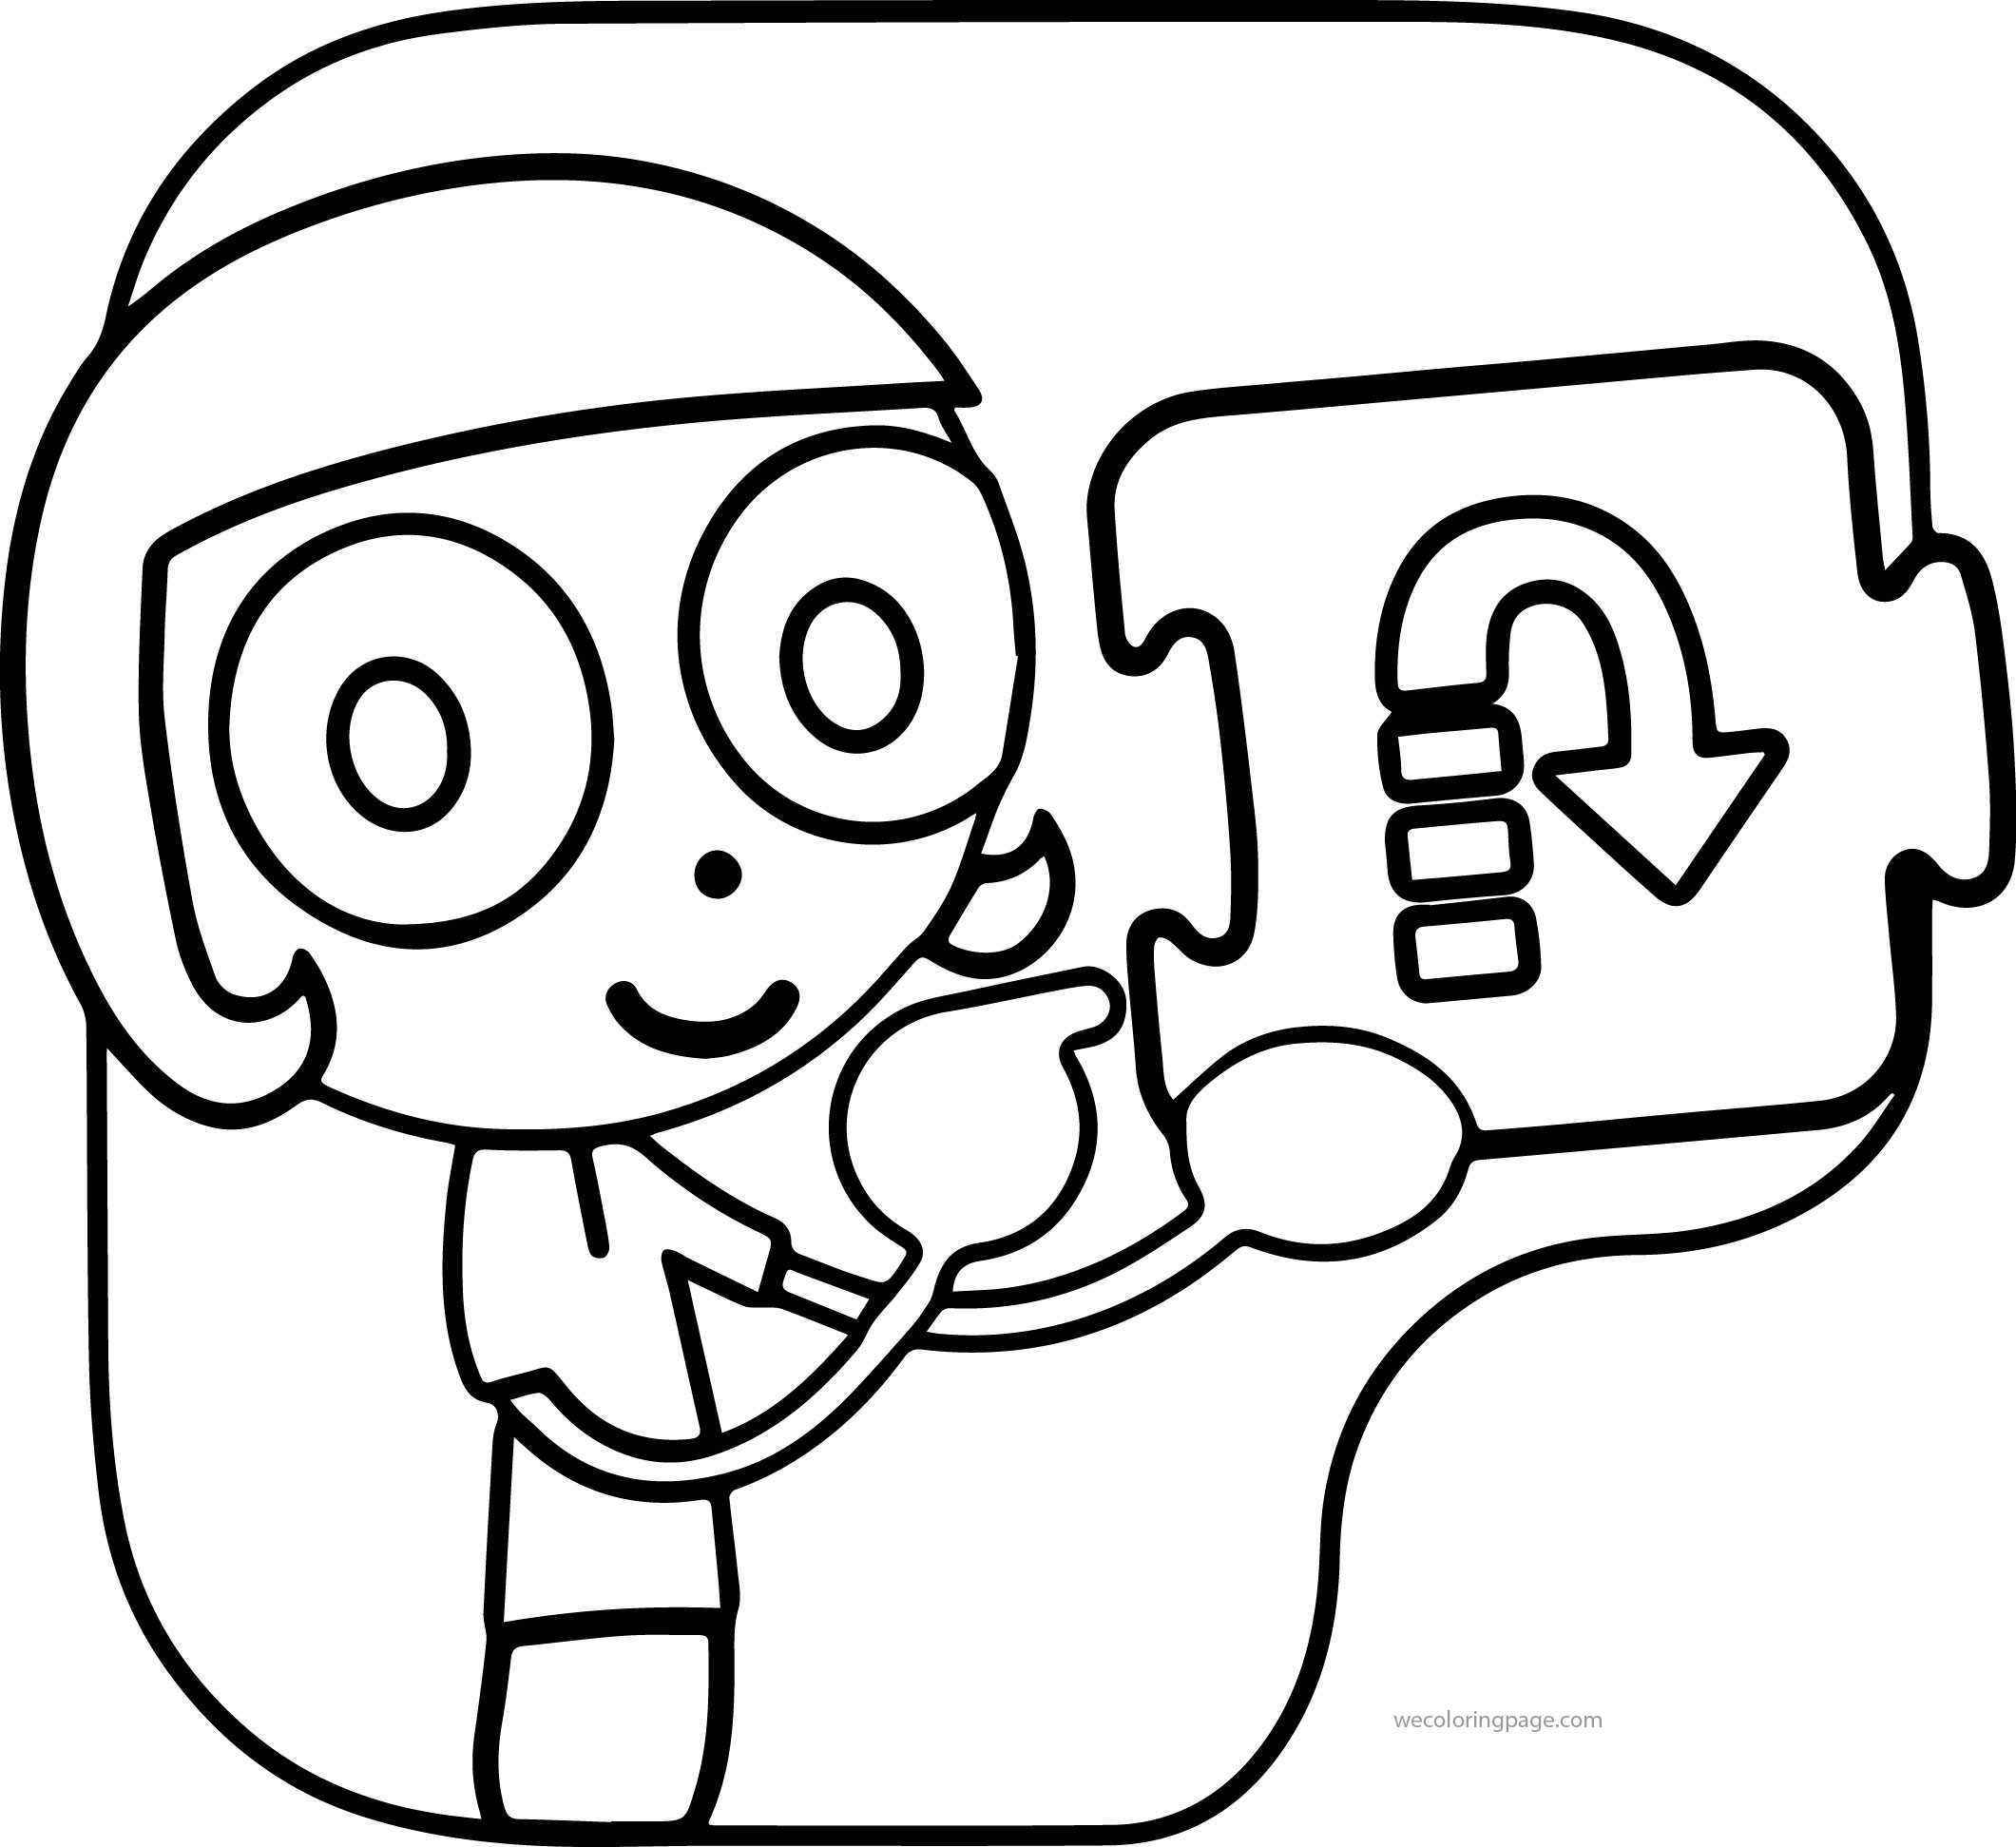 Pbs Kids Coloring Pages
 Pbs Kids Girl Arrow Coloring Page